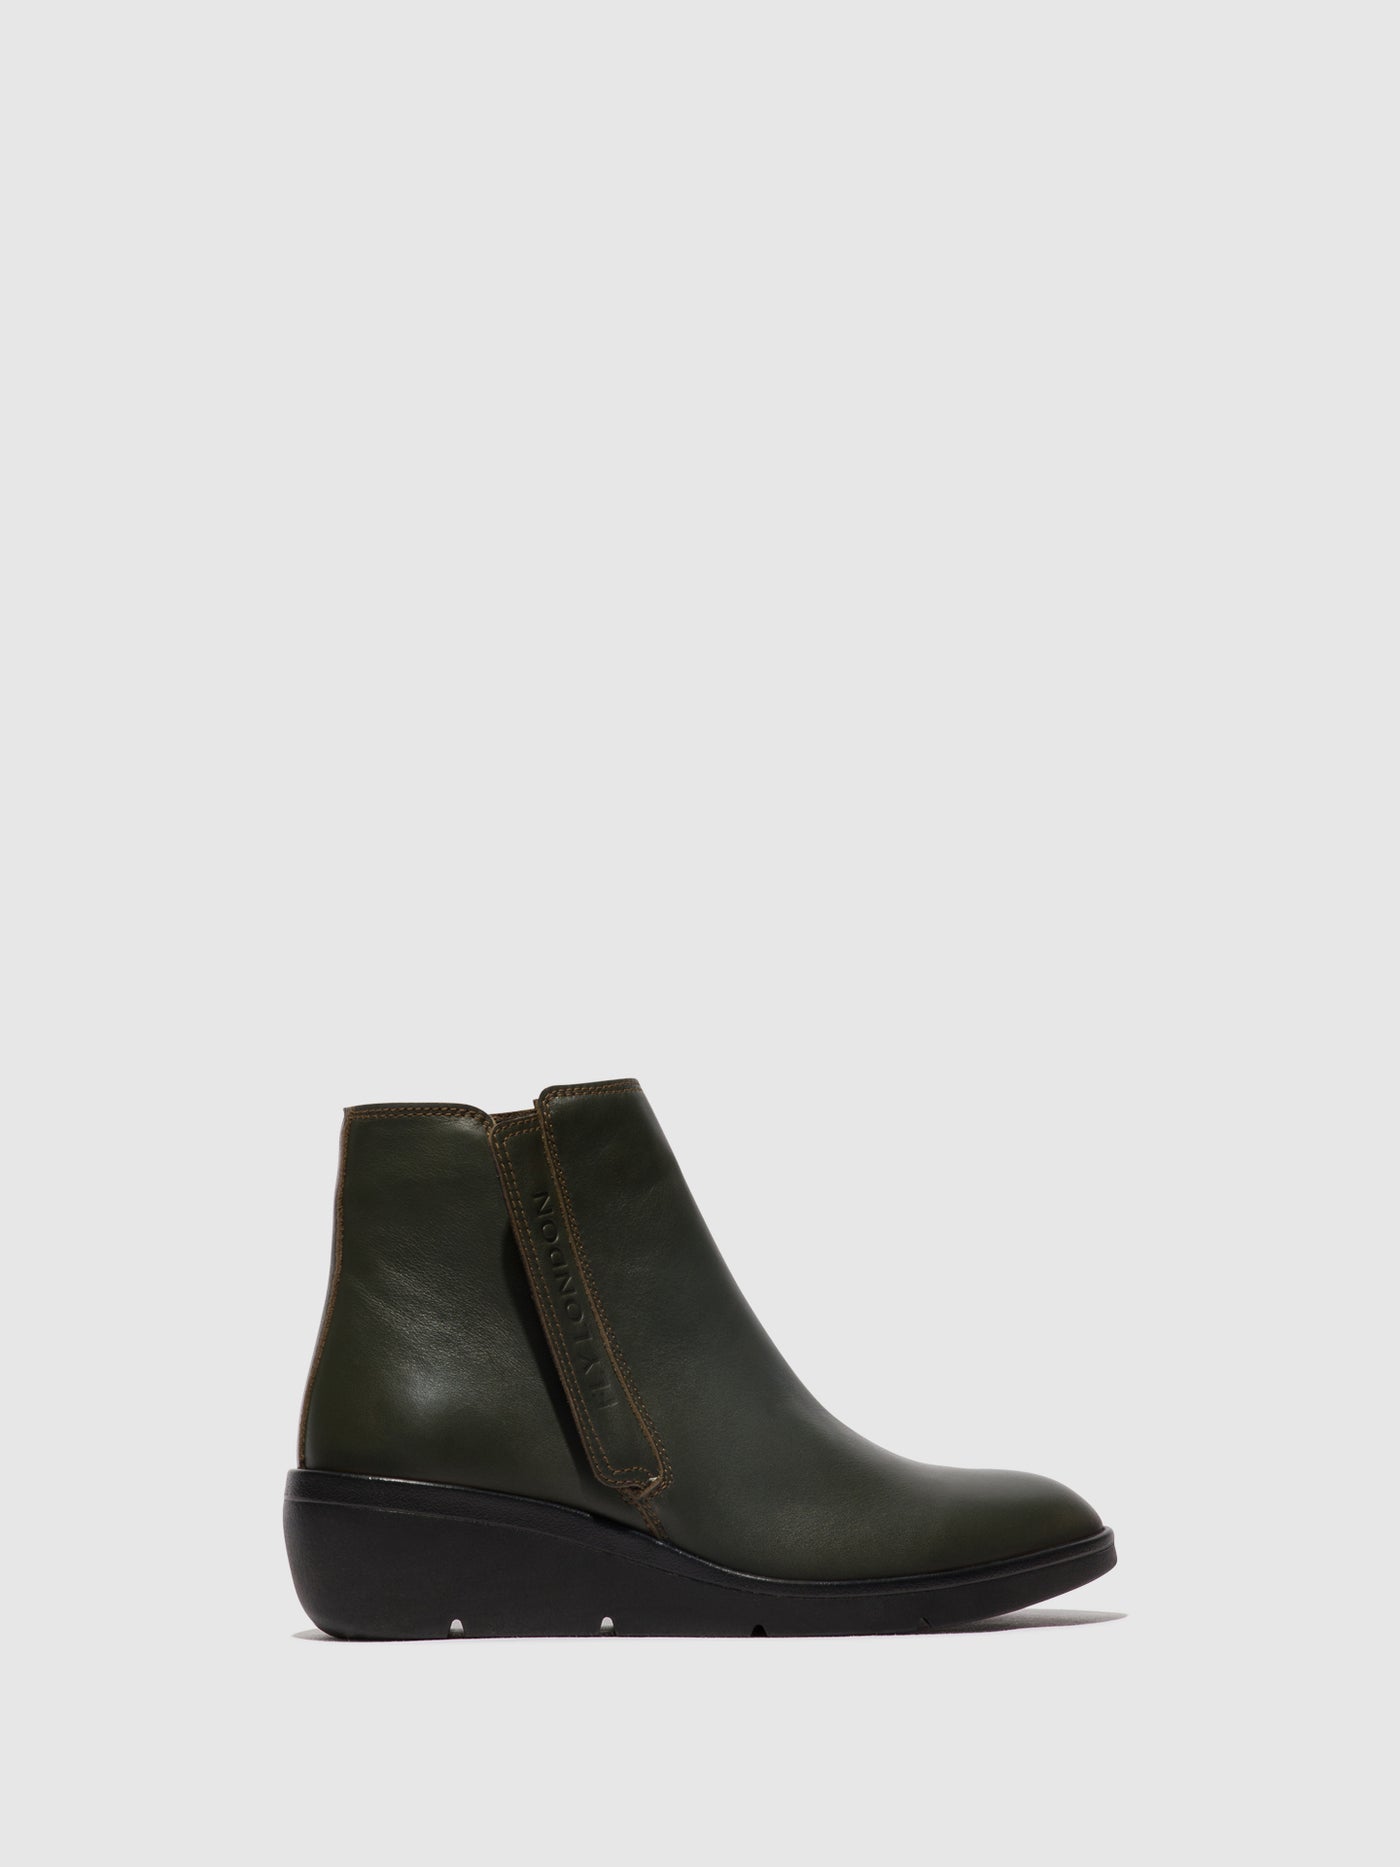 Zip Up Ankle Boots NULA550FLY DARK GREEN